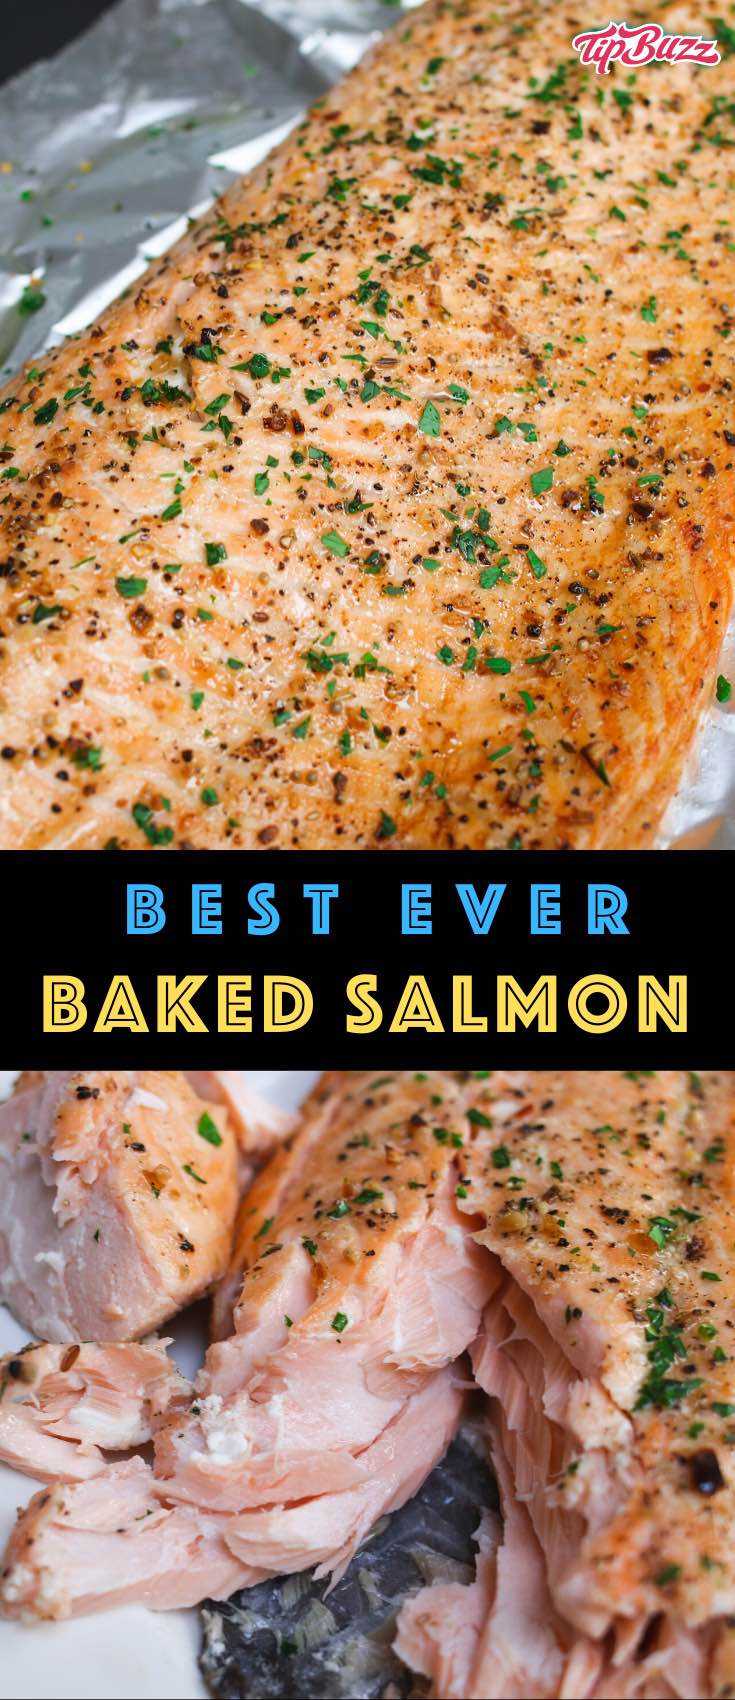 How Long to Bake Salmon in Oven - TipBuzz